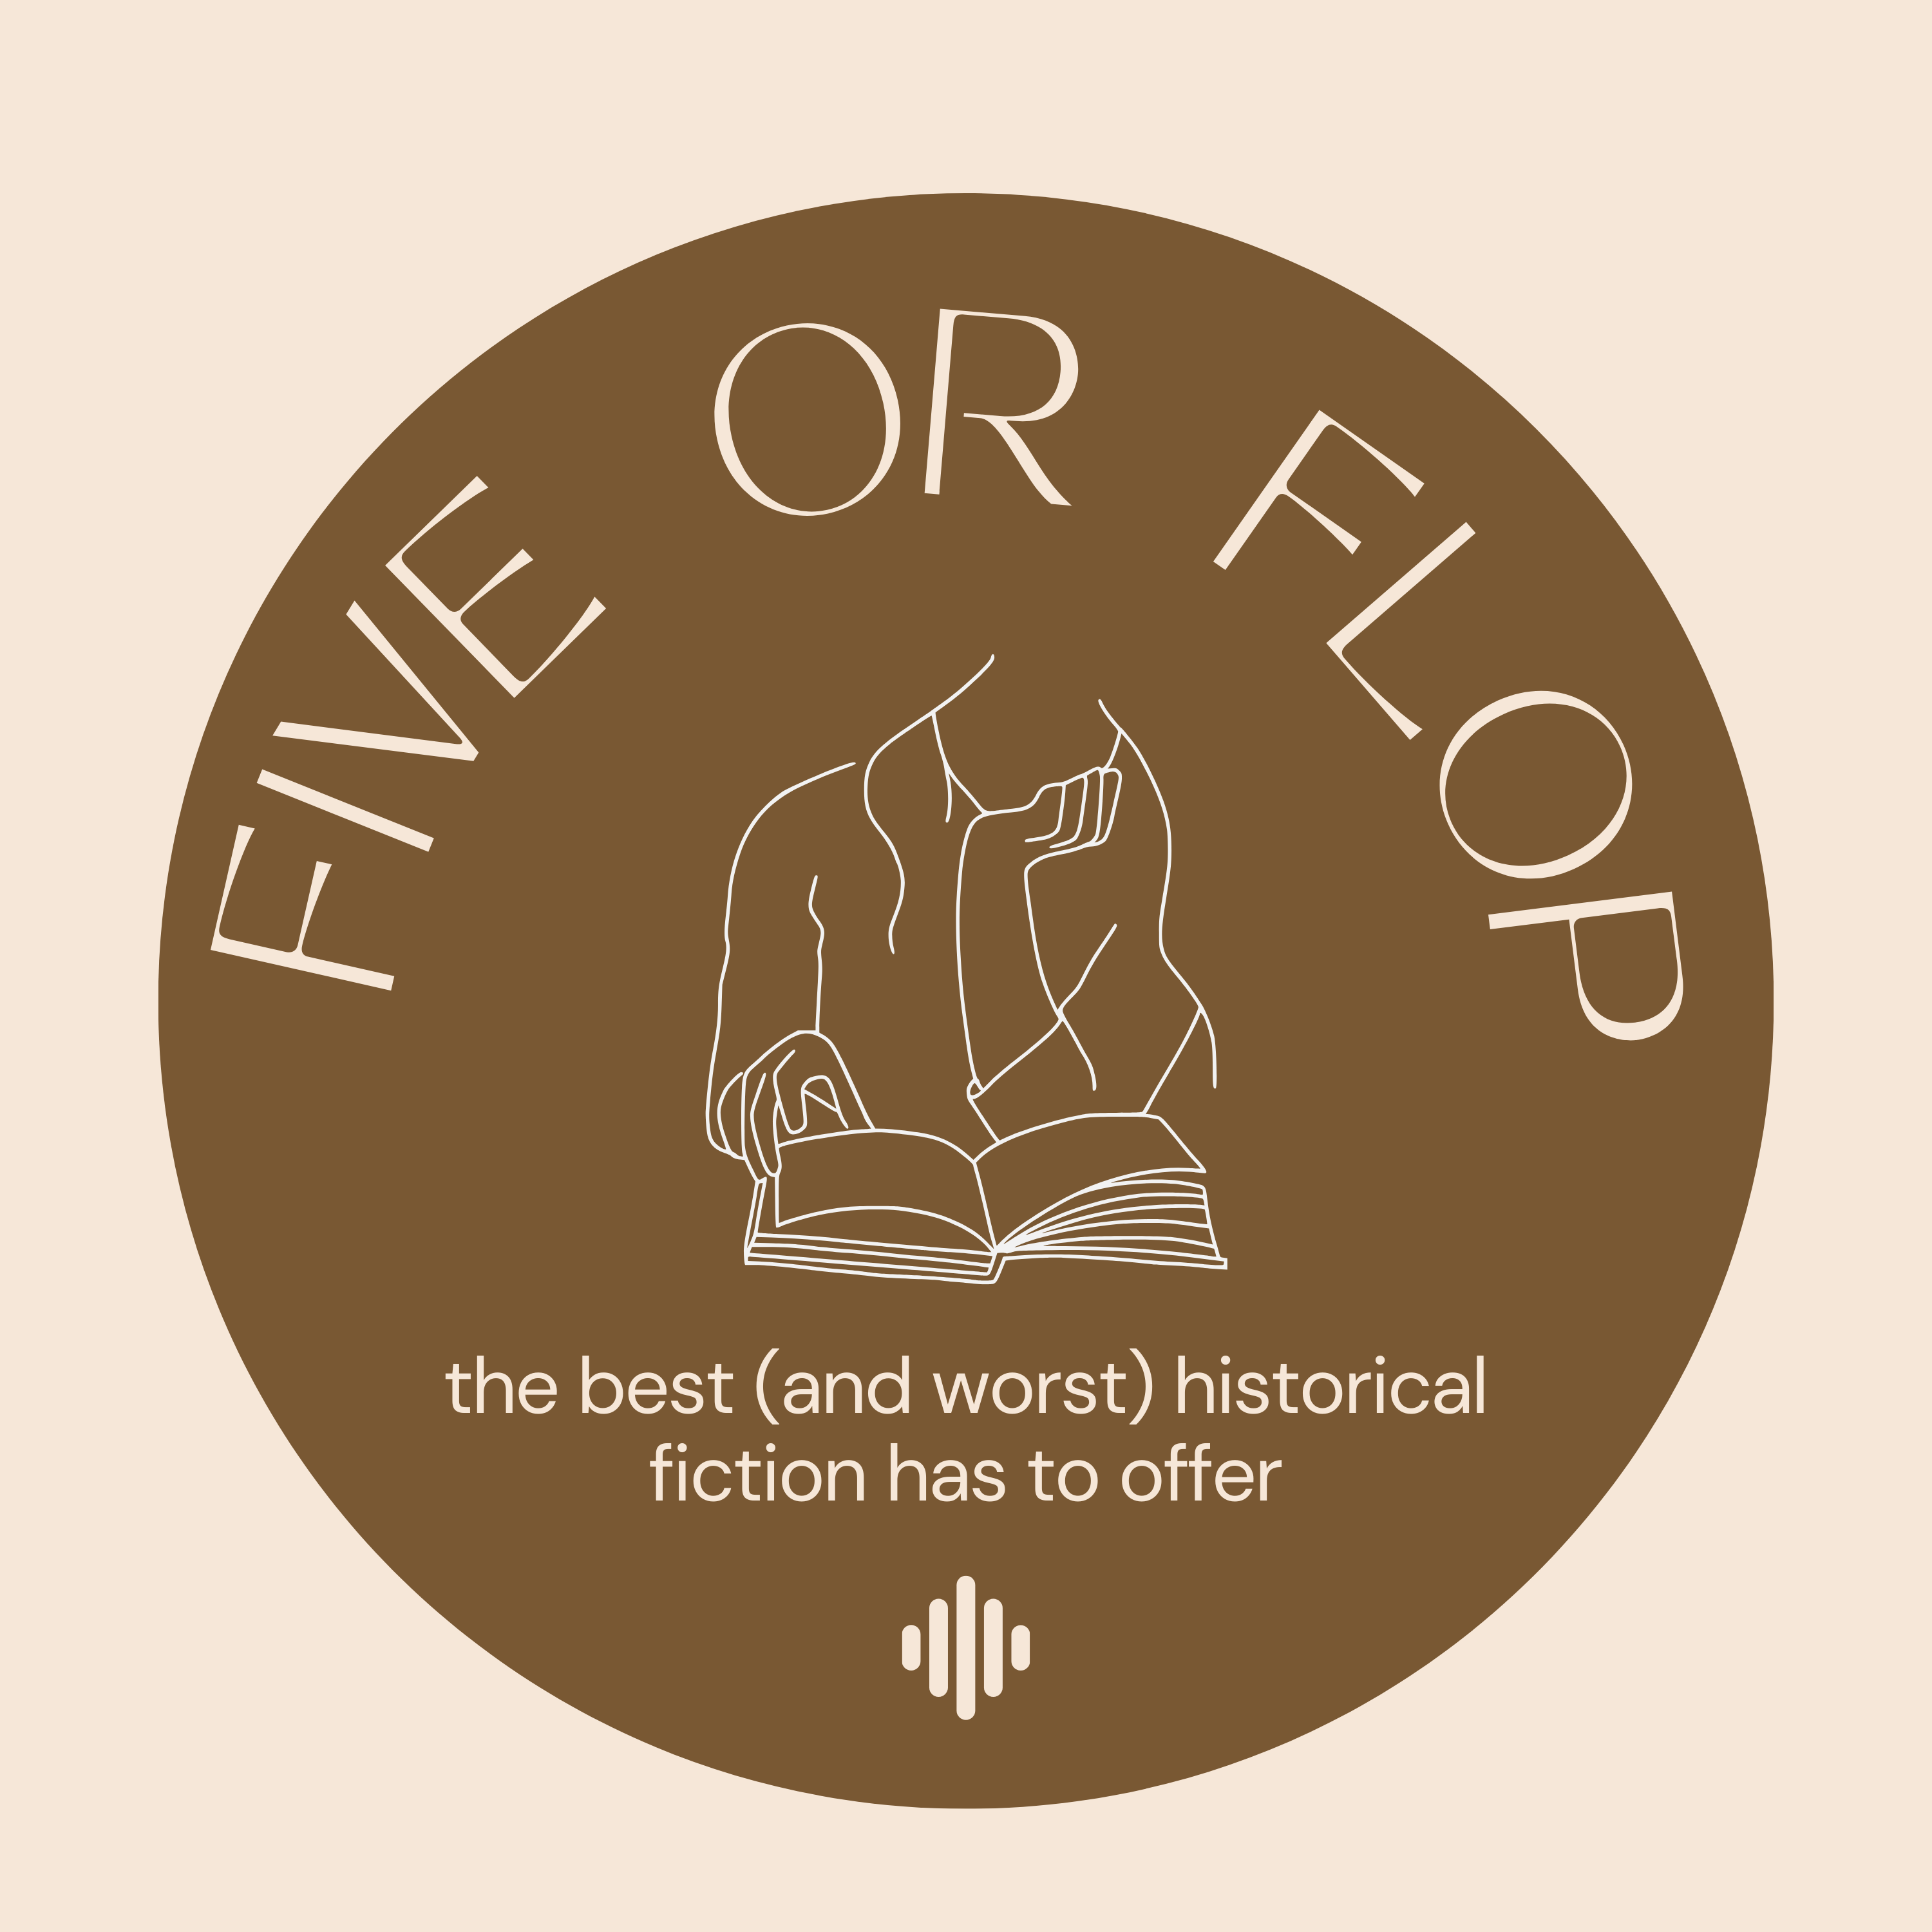 Artwork for Five or Flop: the Best (and Worst) Historical Fiction Has to Offer